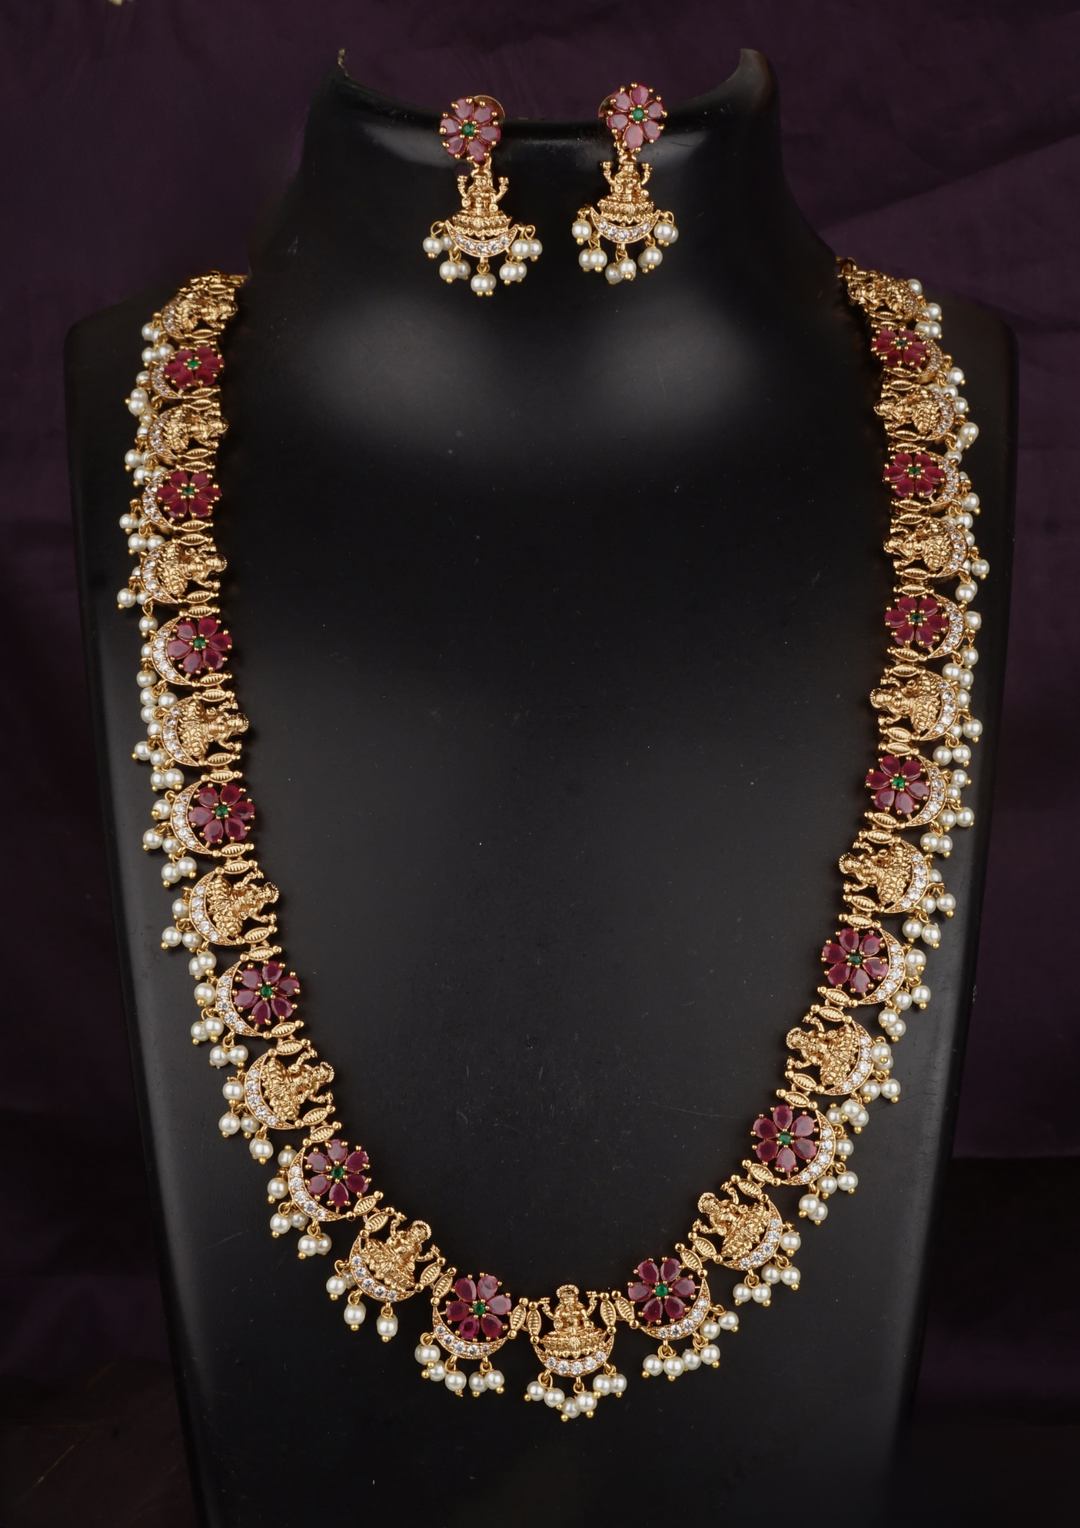 Kundan and beads Matt finish temple jewellery necklace set with earrings LC 1012020